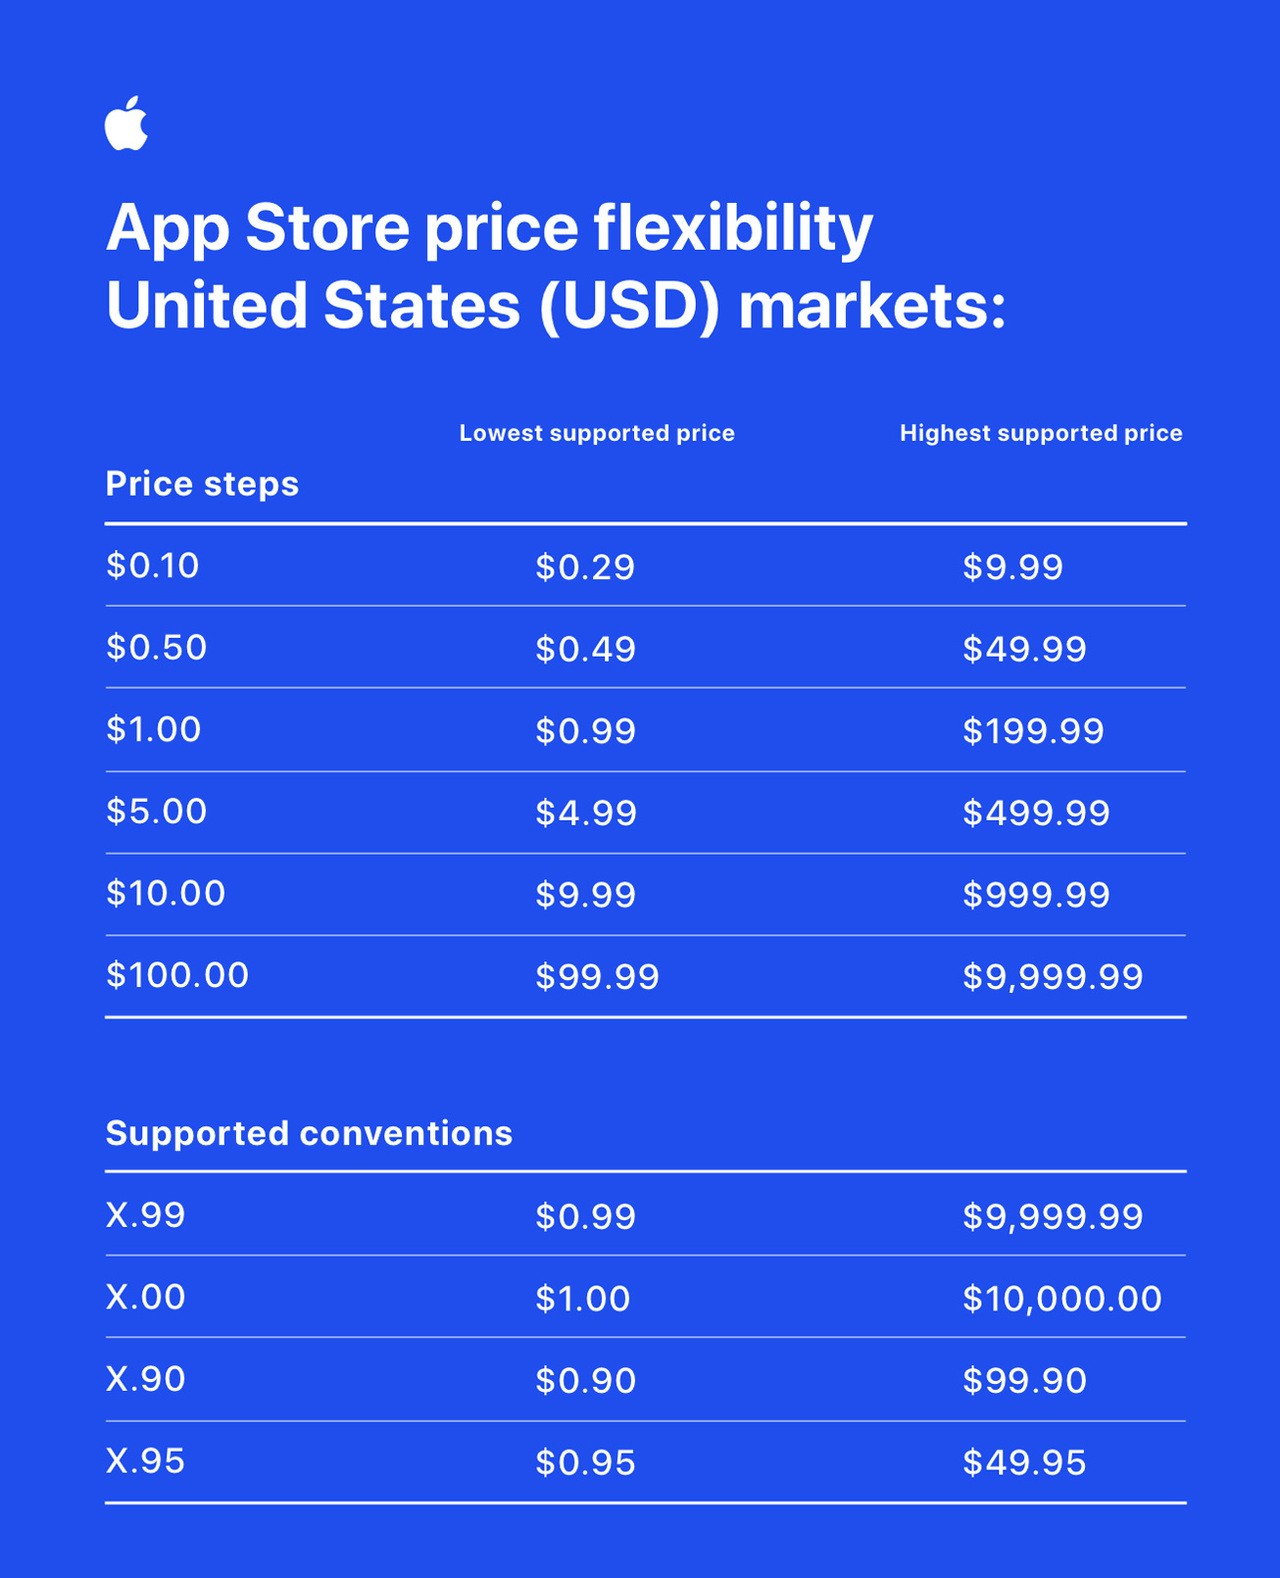 Apple App Store pricing flexibility United States markets